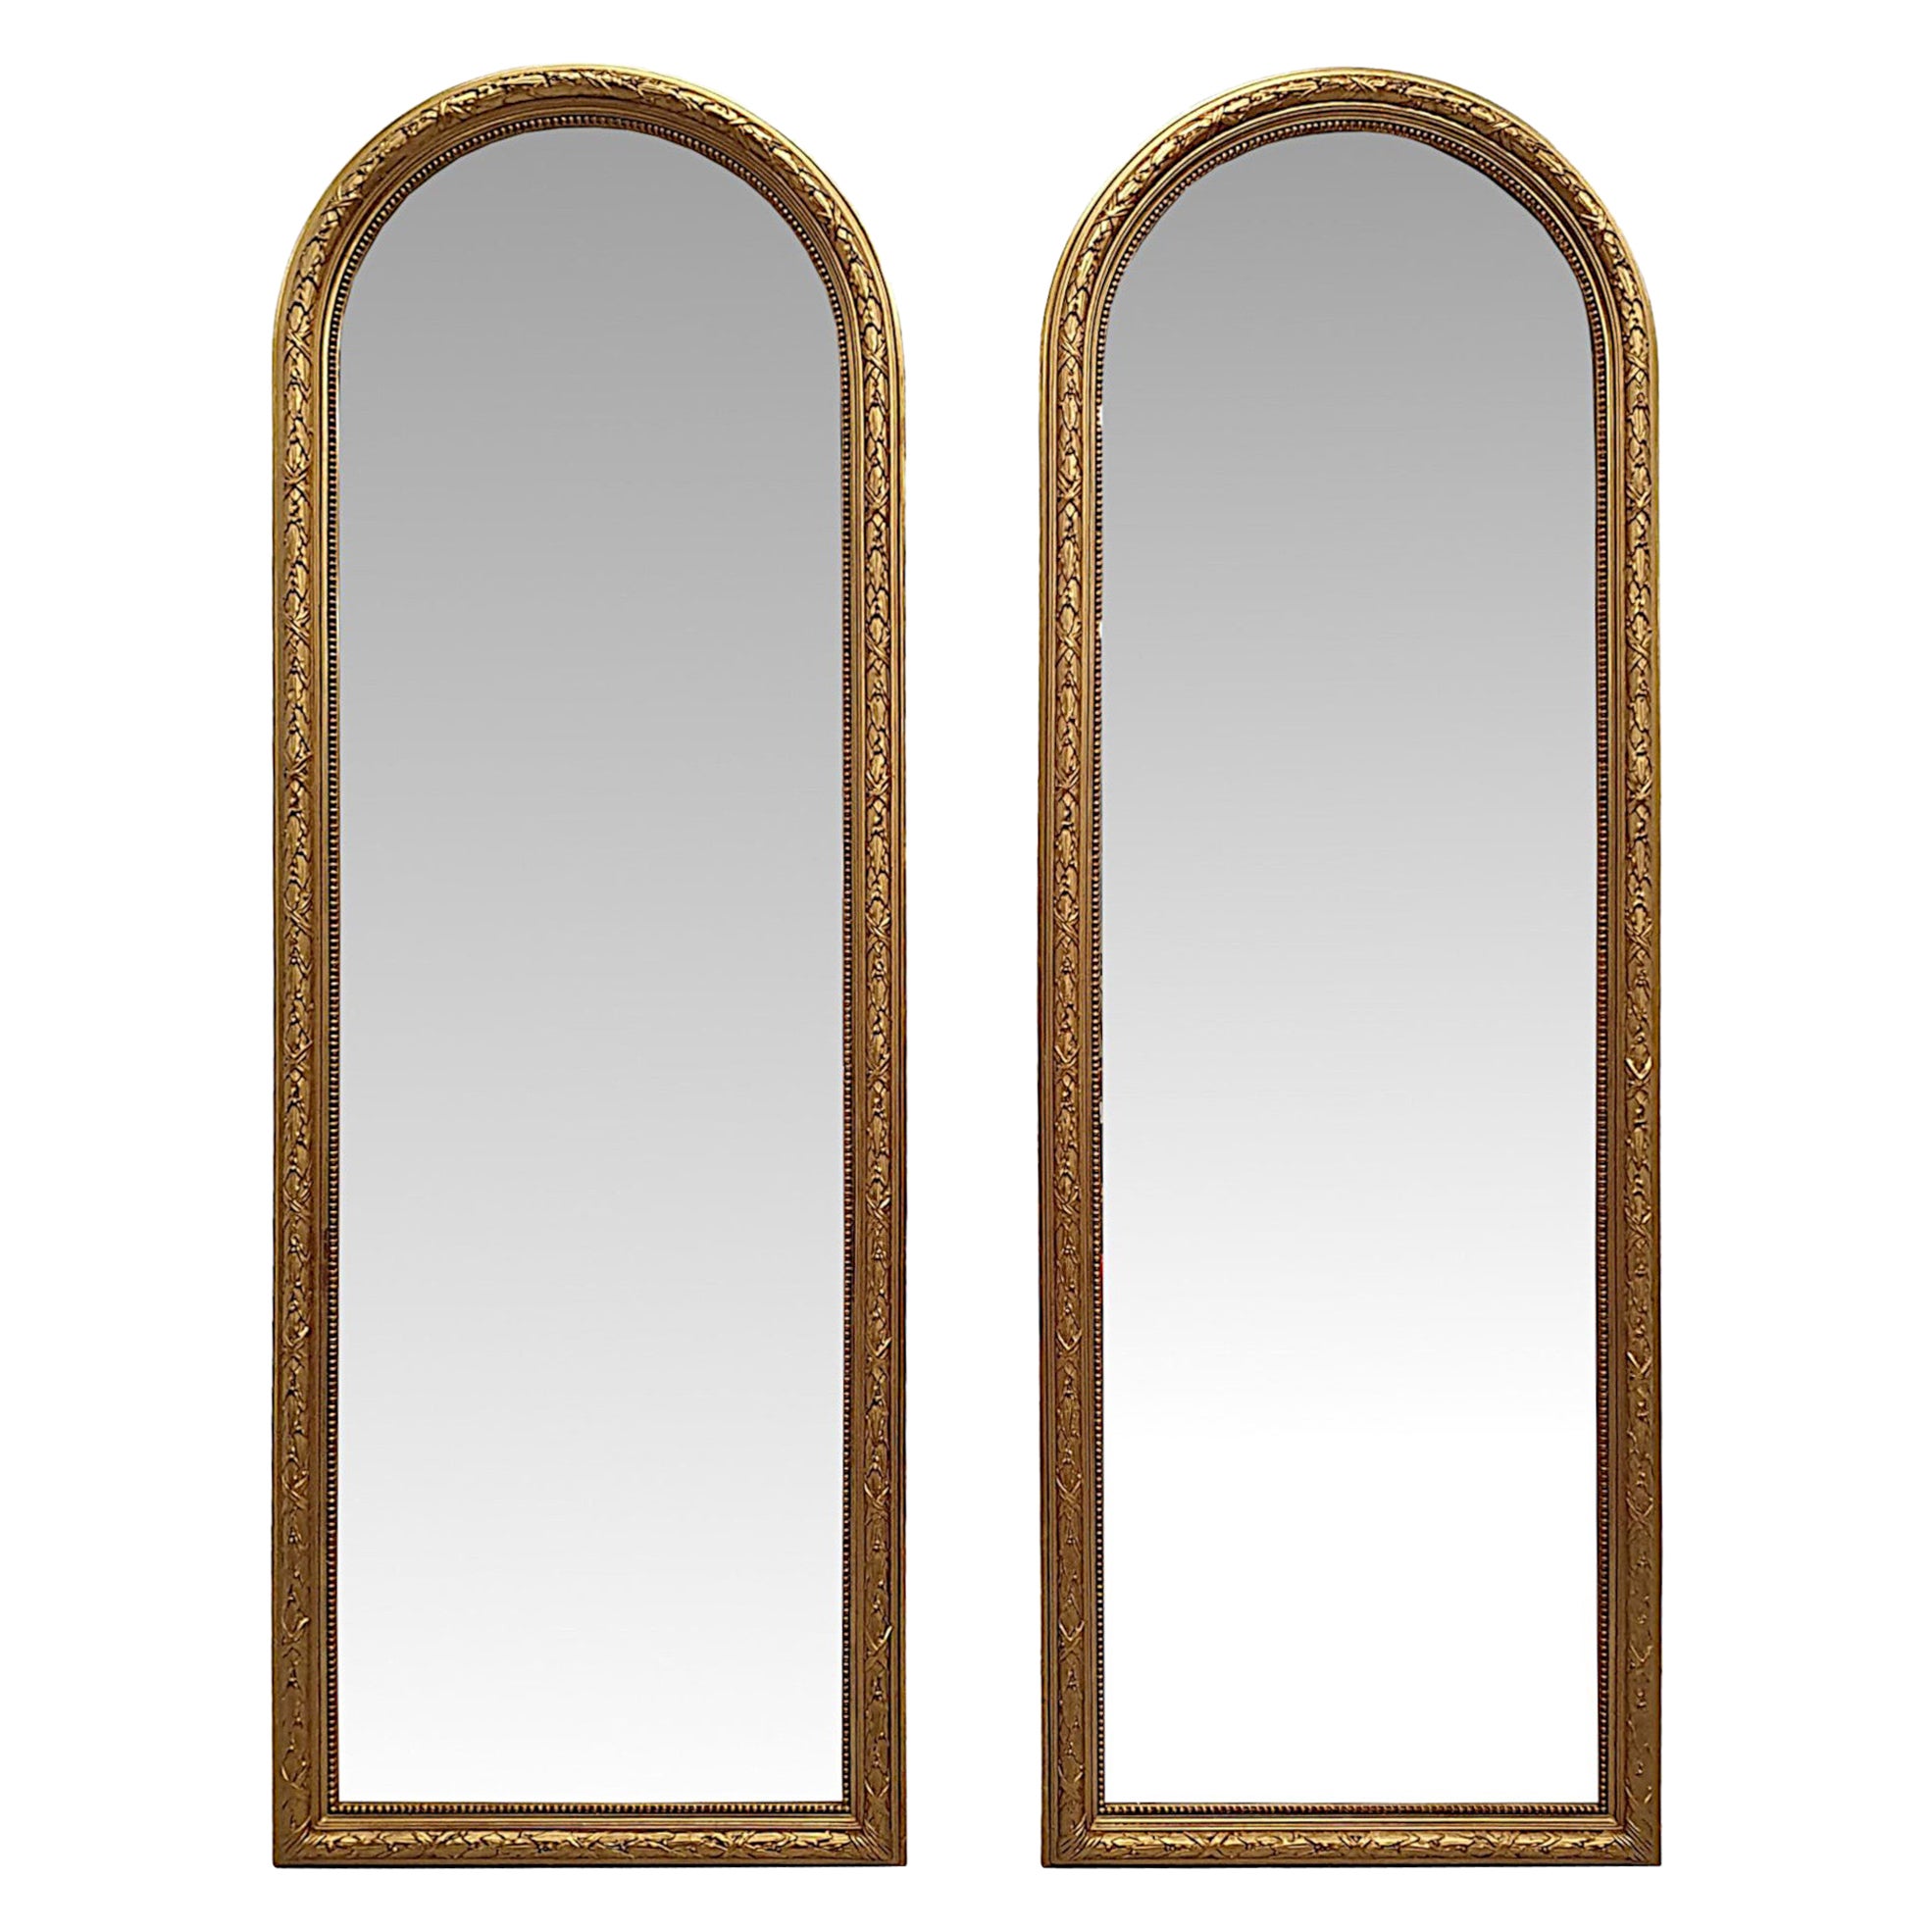 Very Rare and Fine Pair of 19th Century Giltwood Arch Top Pier Mirrors For Sale